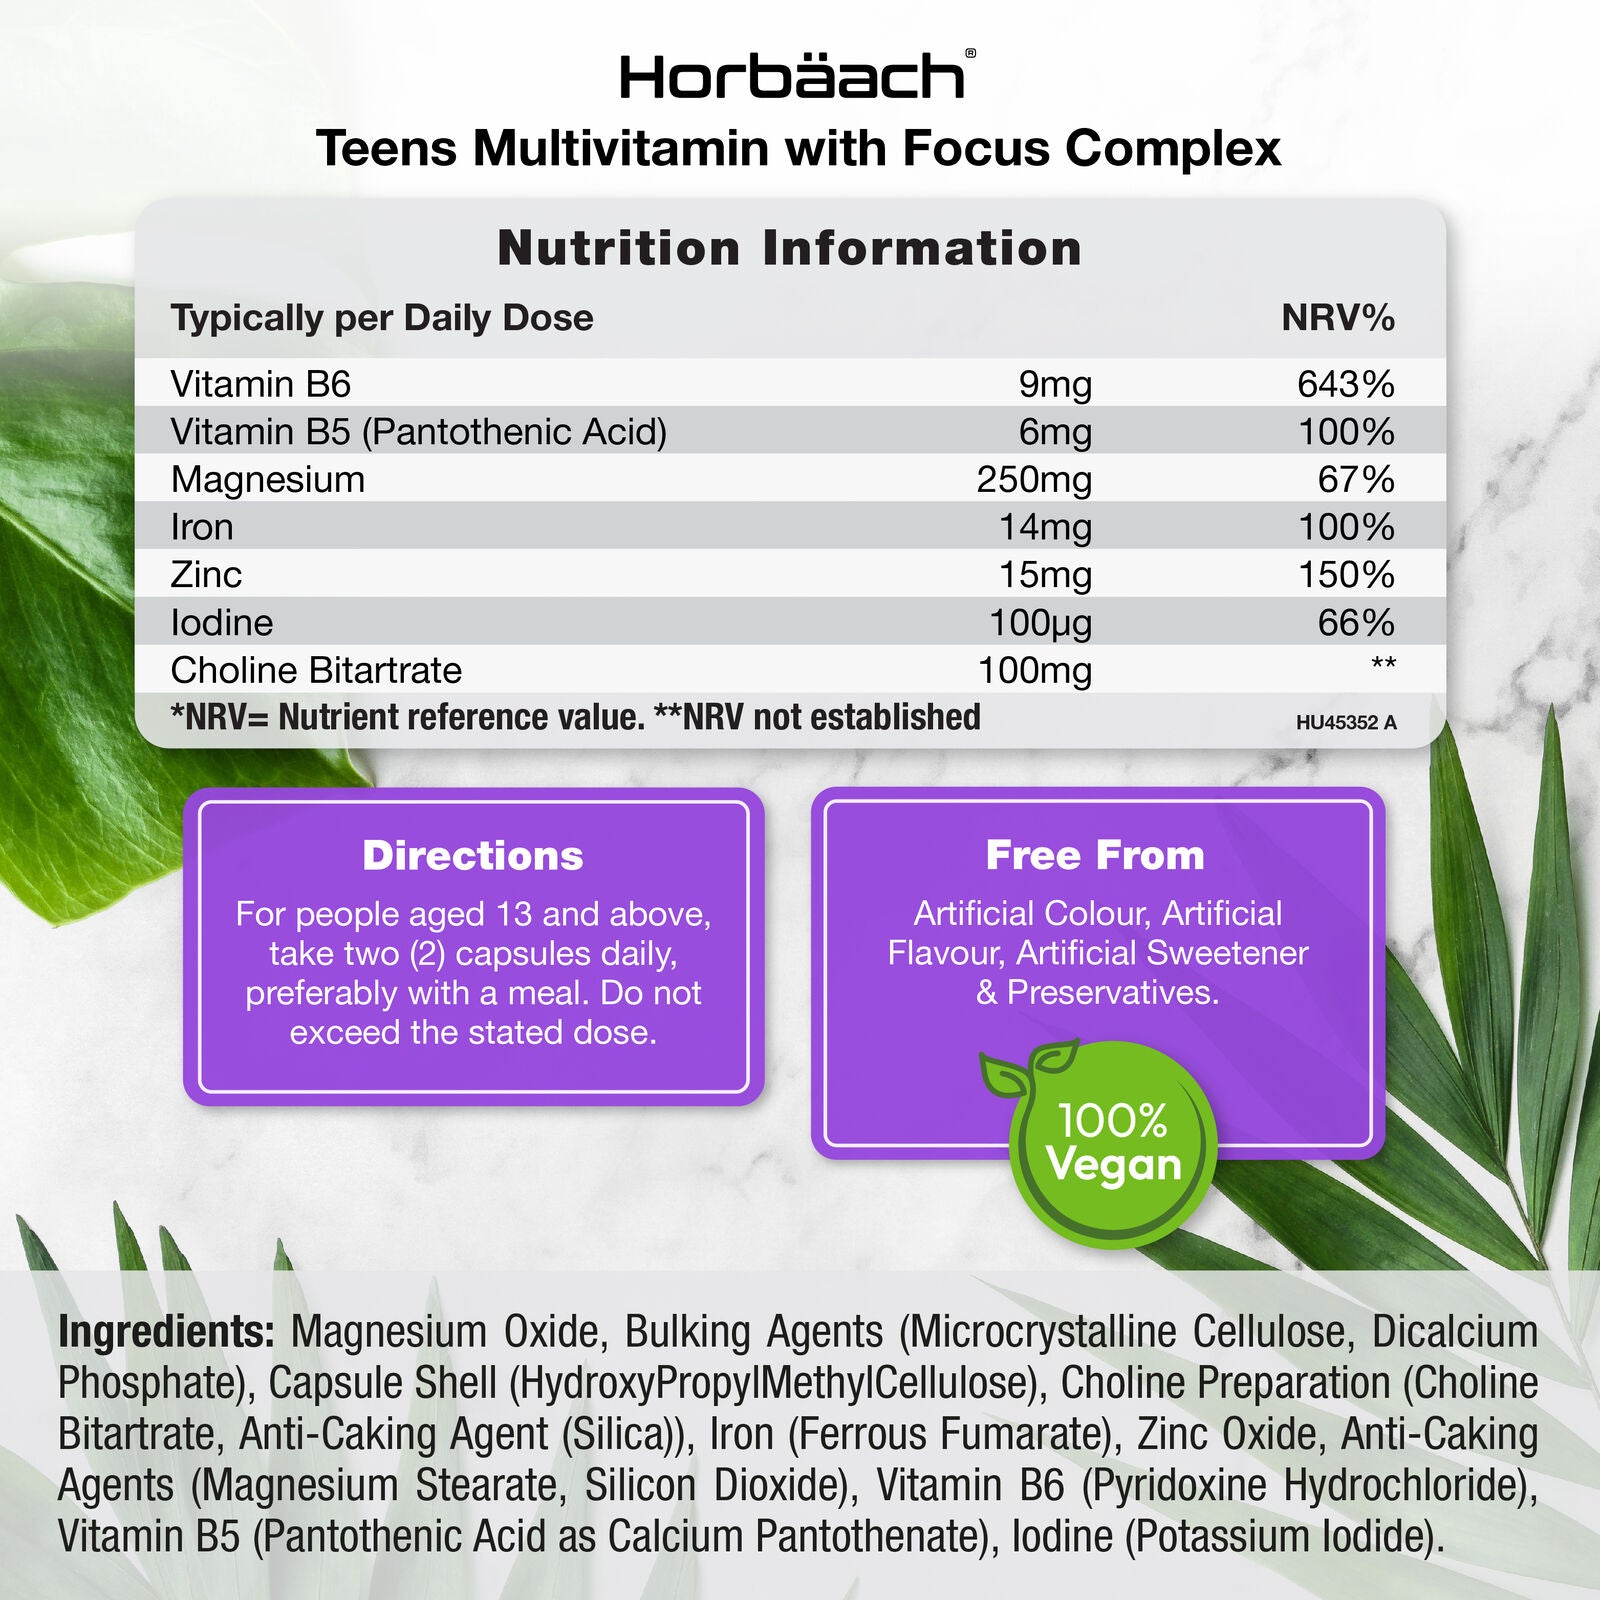 Multivitamins with Focus Complex for Teens | 180 Capsules